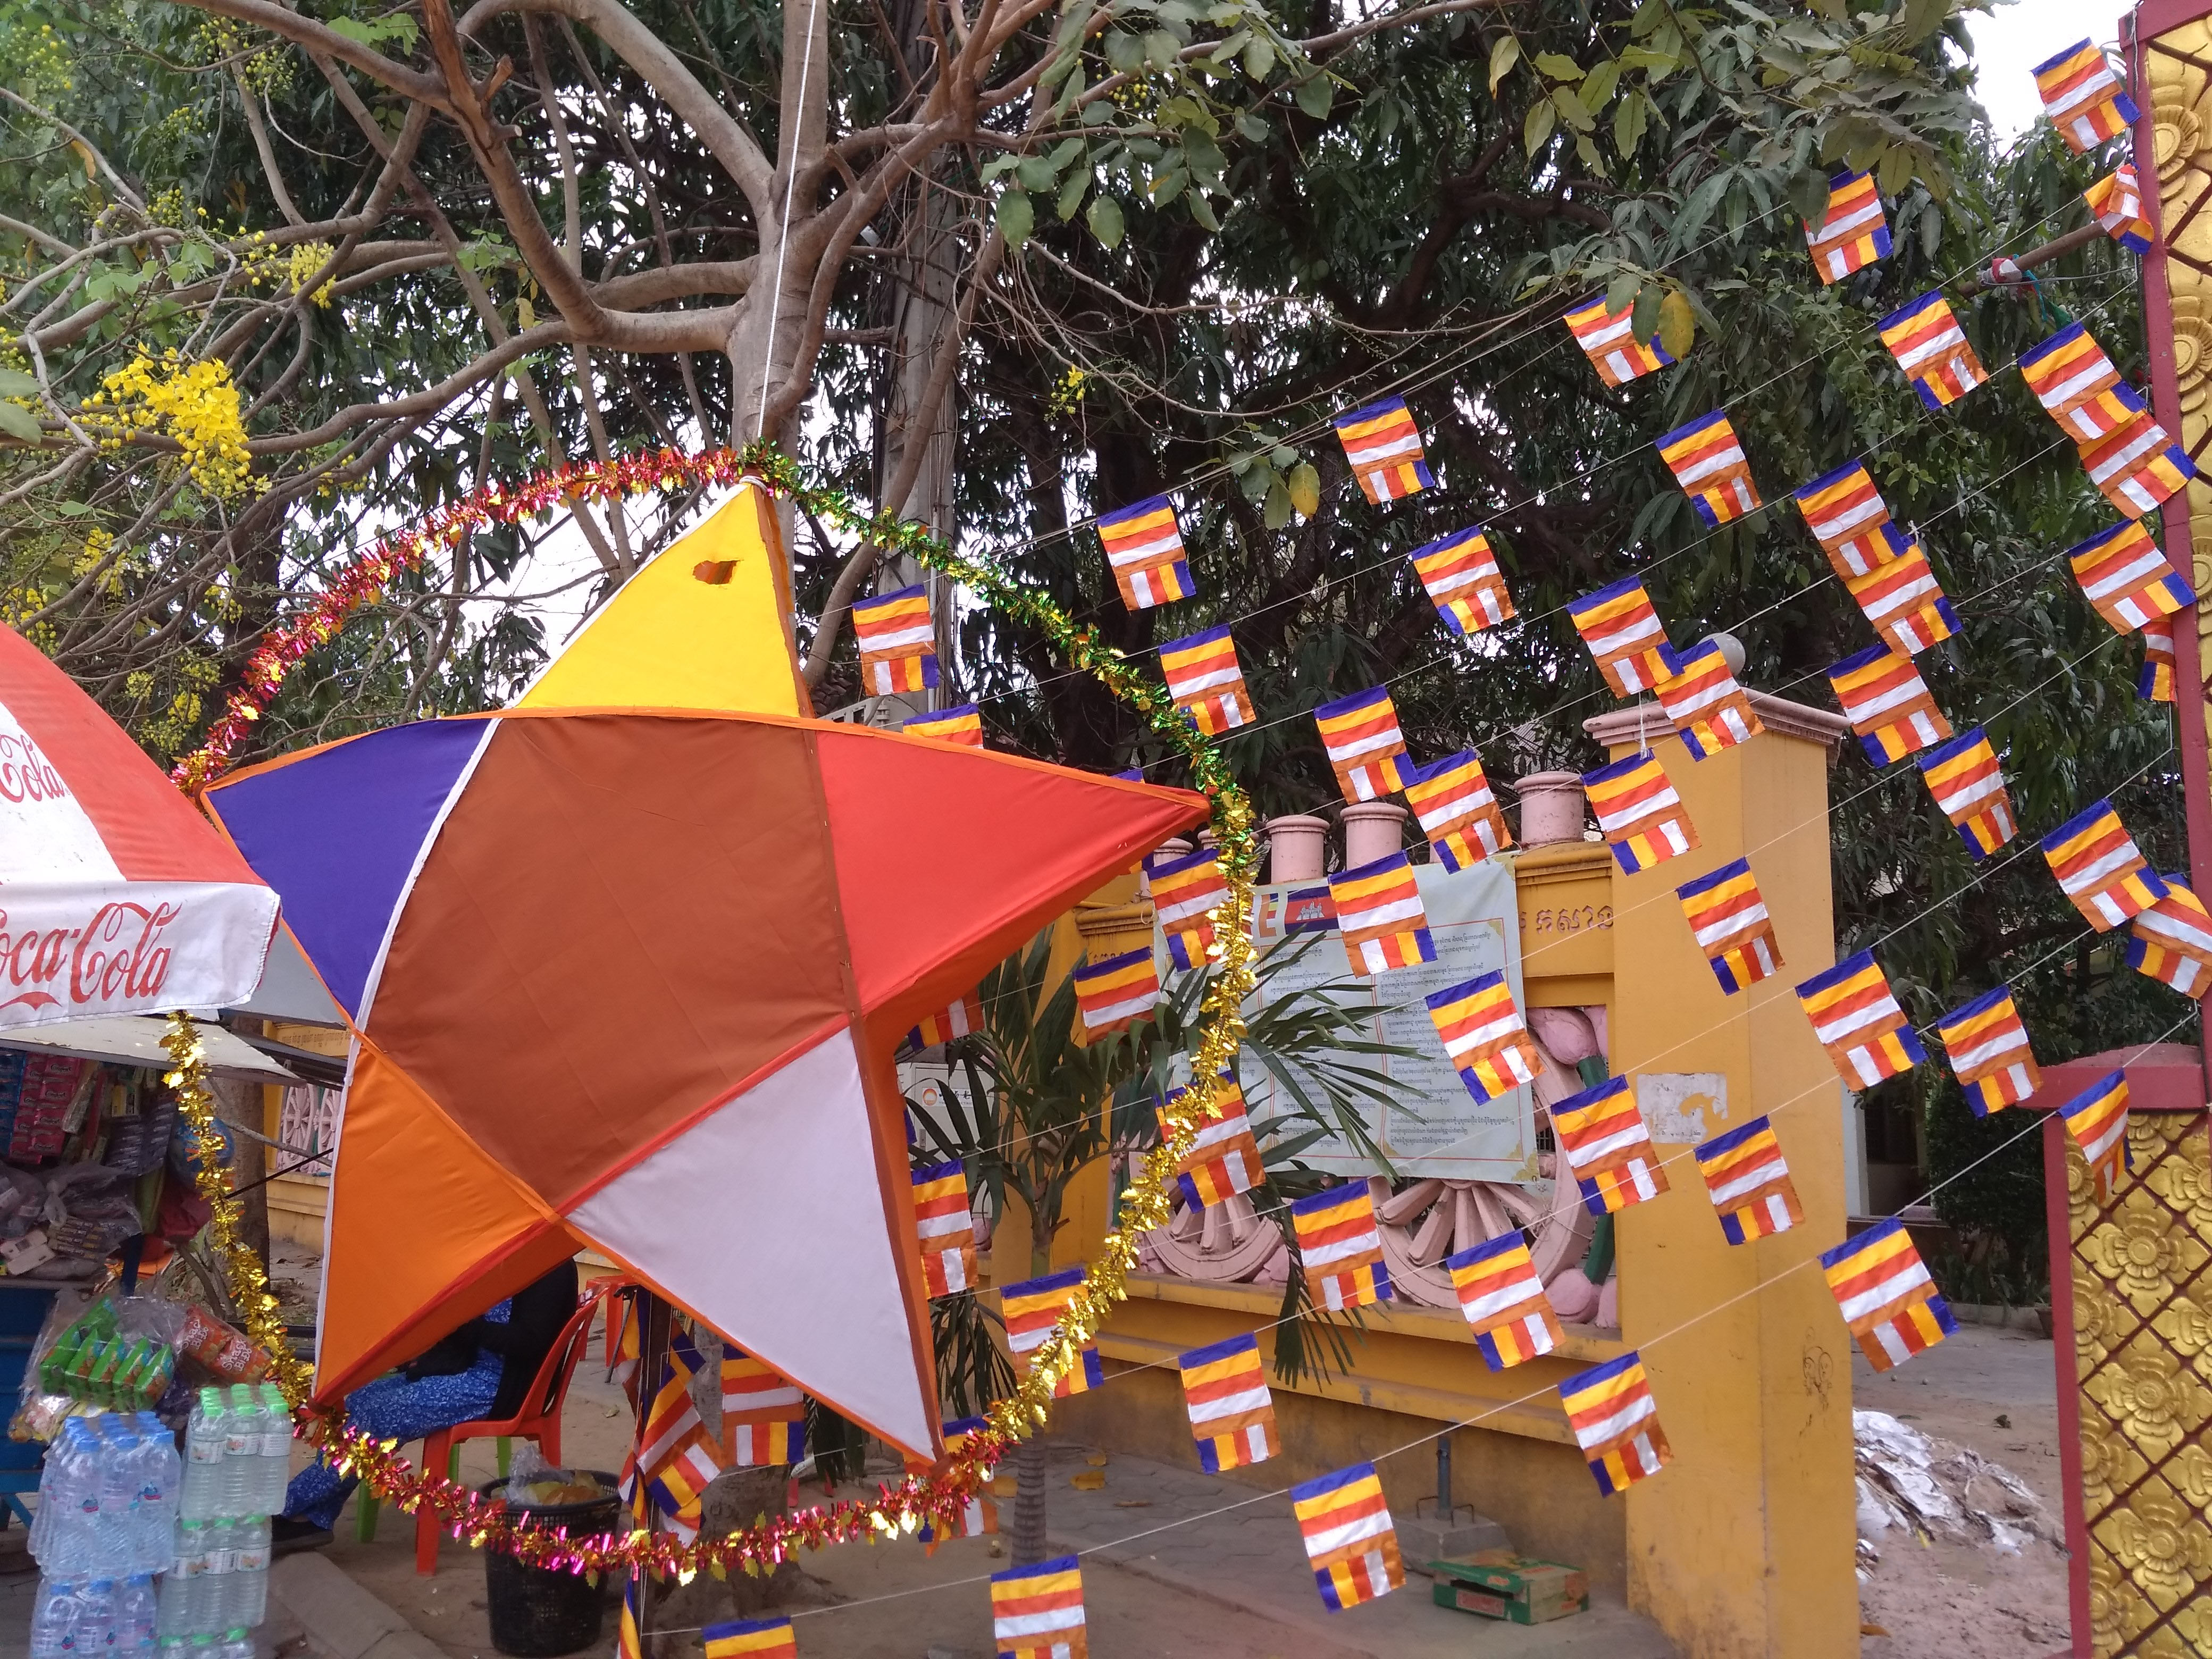 Decorations for Khmer New Year